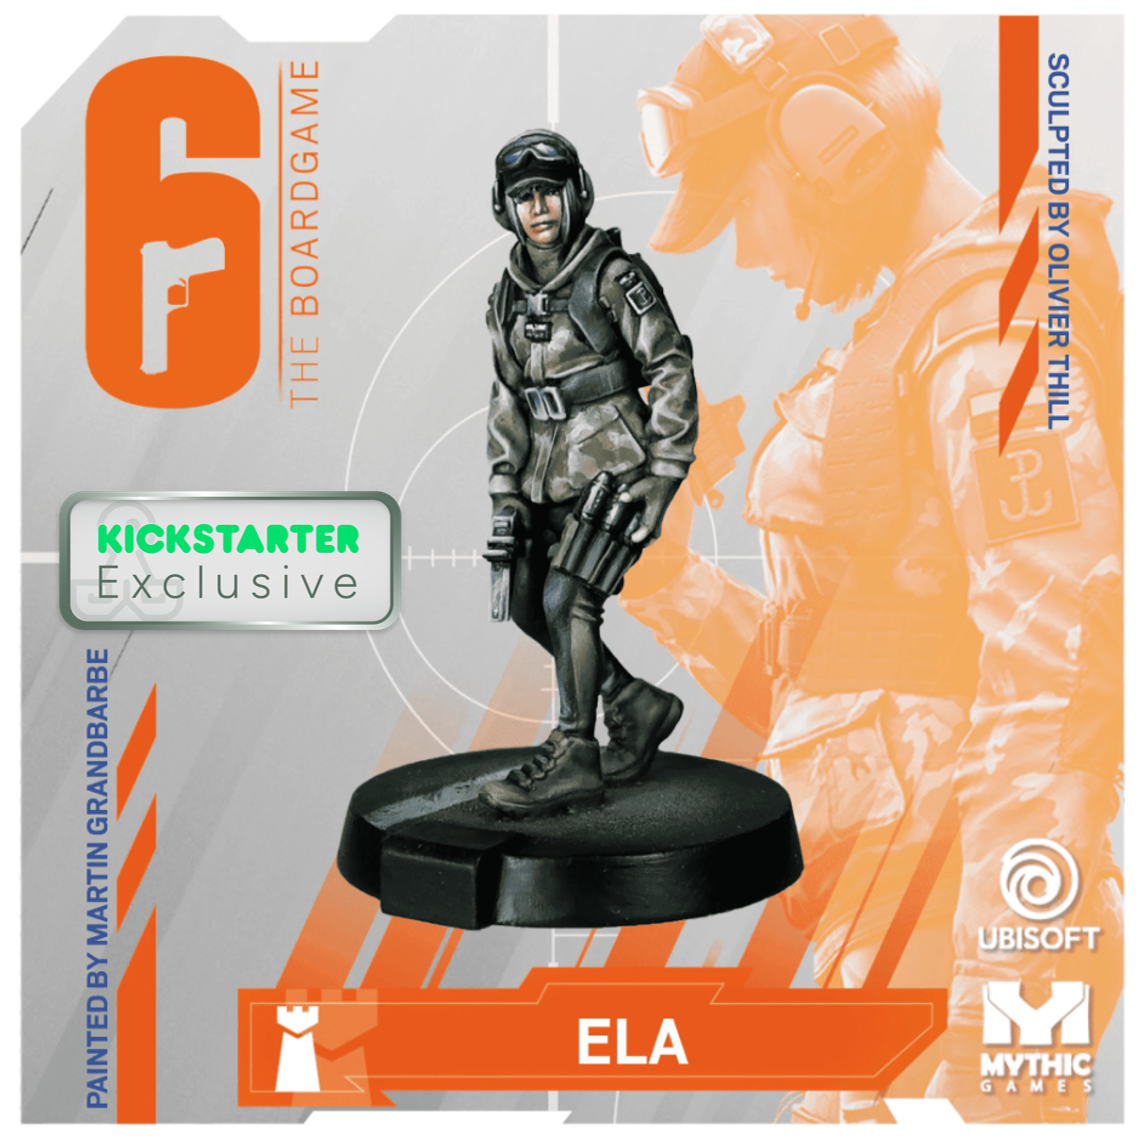 Kickstarter Exclusive Year 2 Expansion, Ela Miniature, From 6: Siege - The Board Game